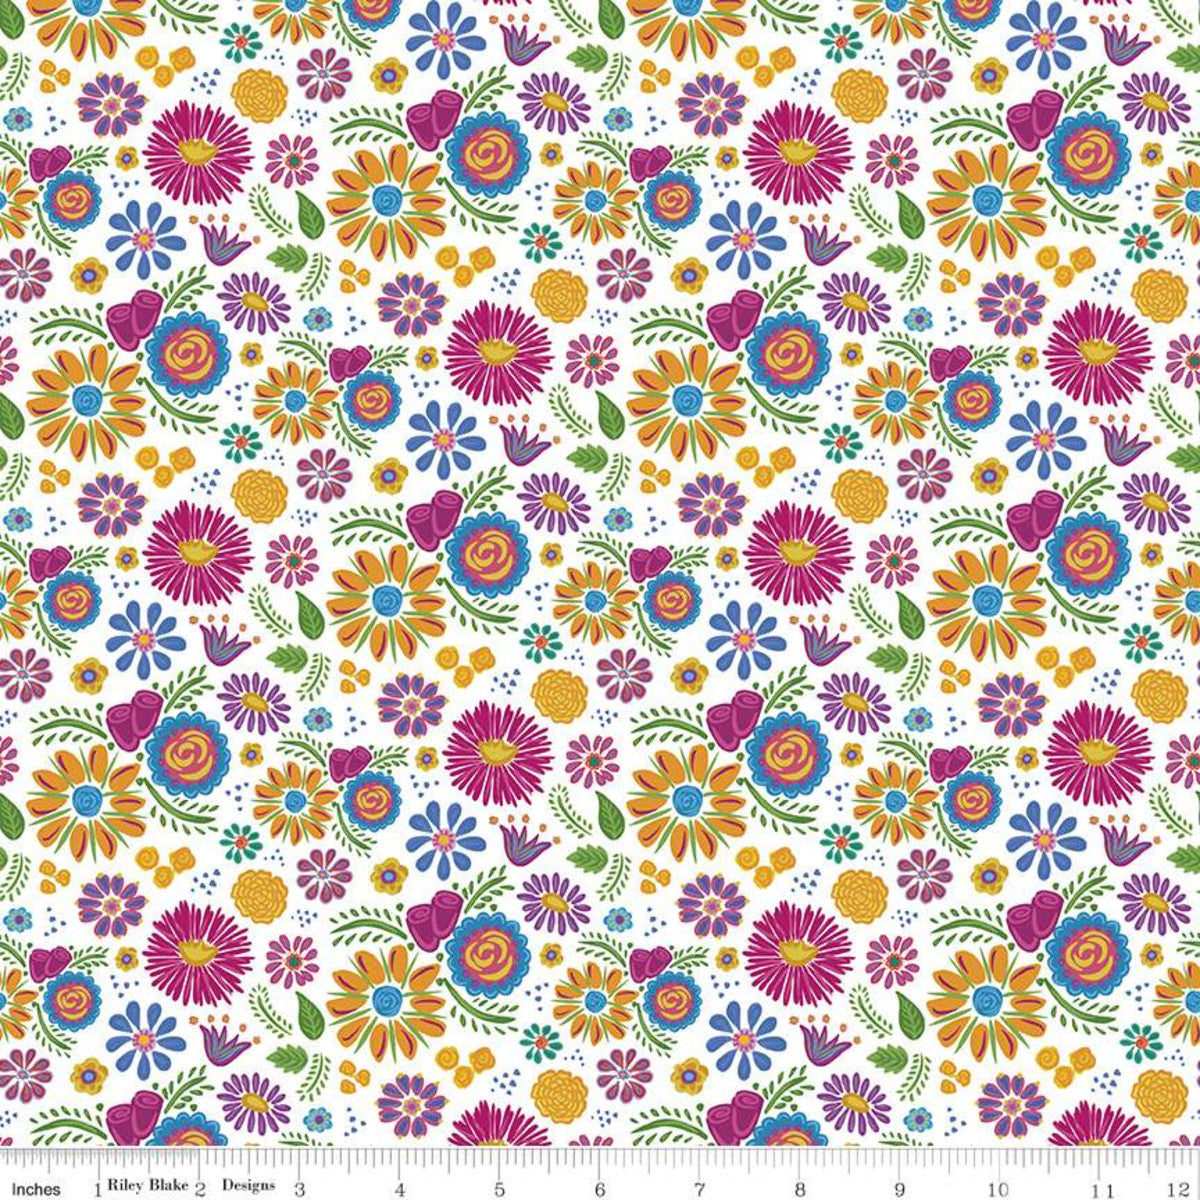 Eleanor - Floral White by Crafty Chica (1 yard)